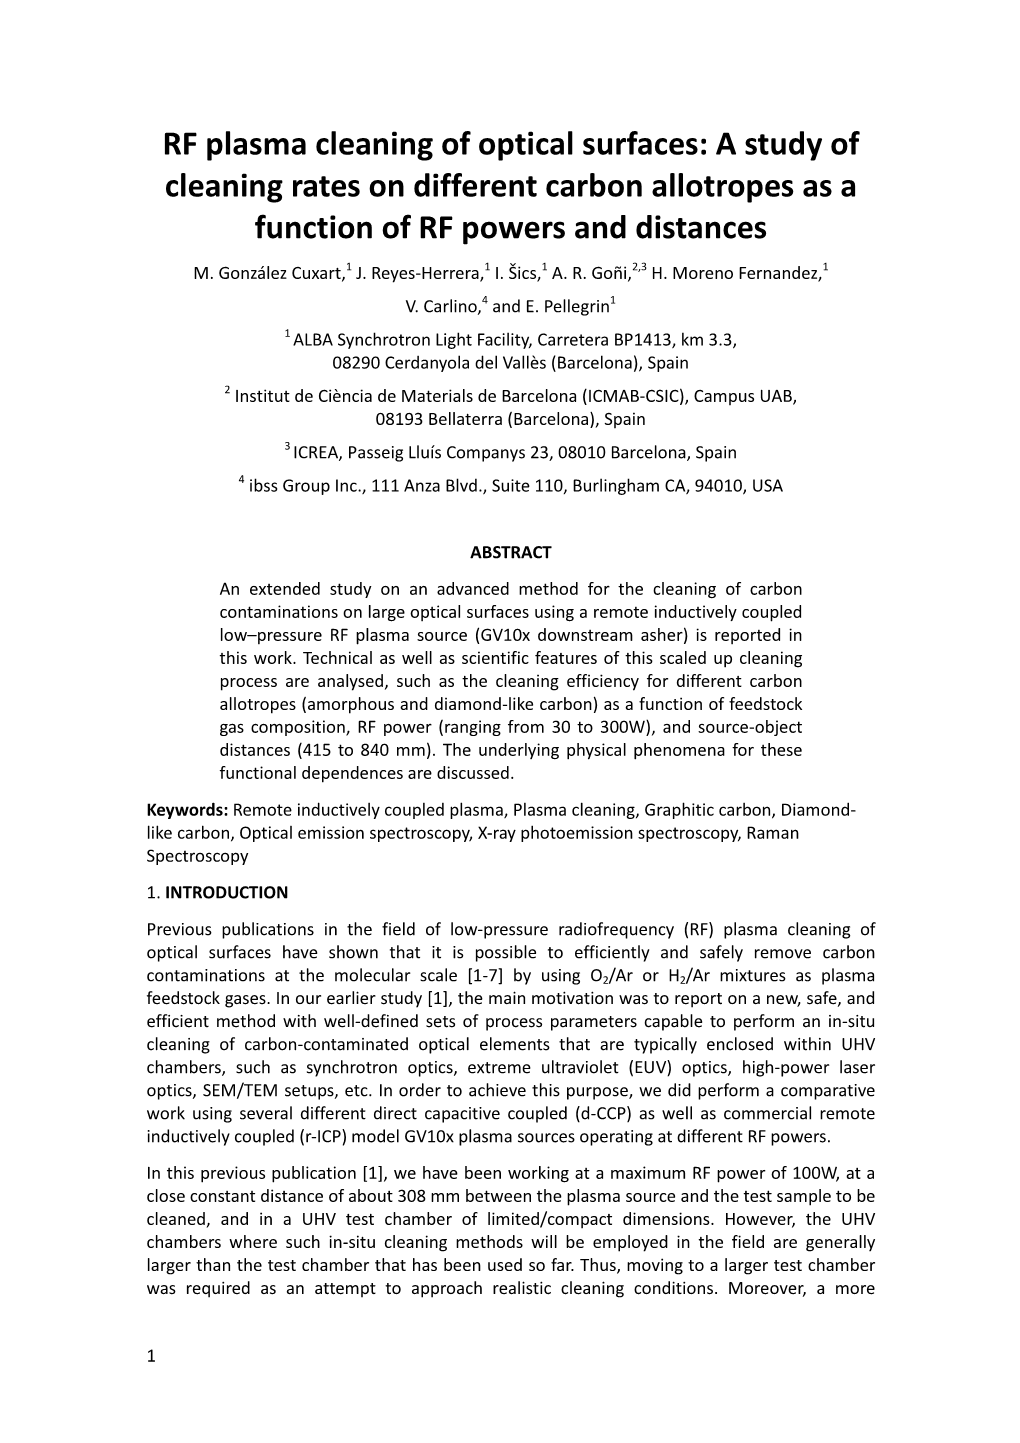 RF Plasma Cleaning of Optical Surfaces: a Study of Cleaning Rates on Different Carbon Allotropes As a Function of RF Powers and Distances